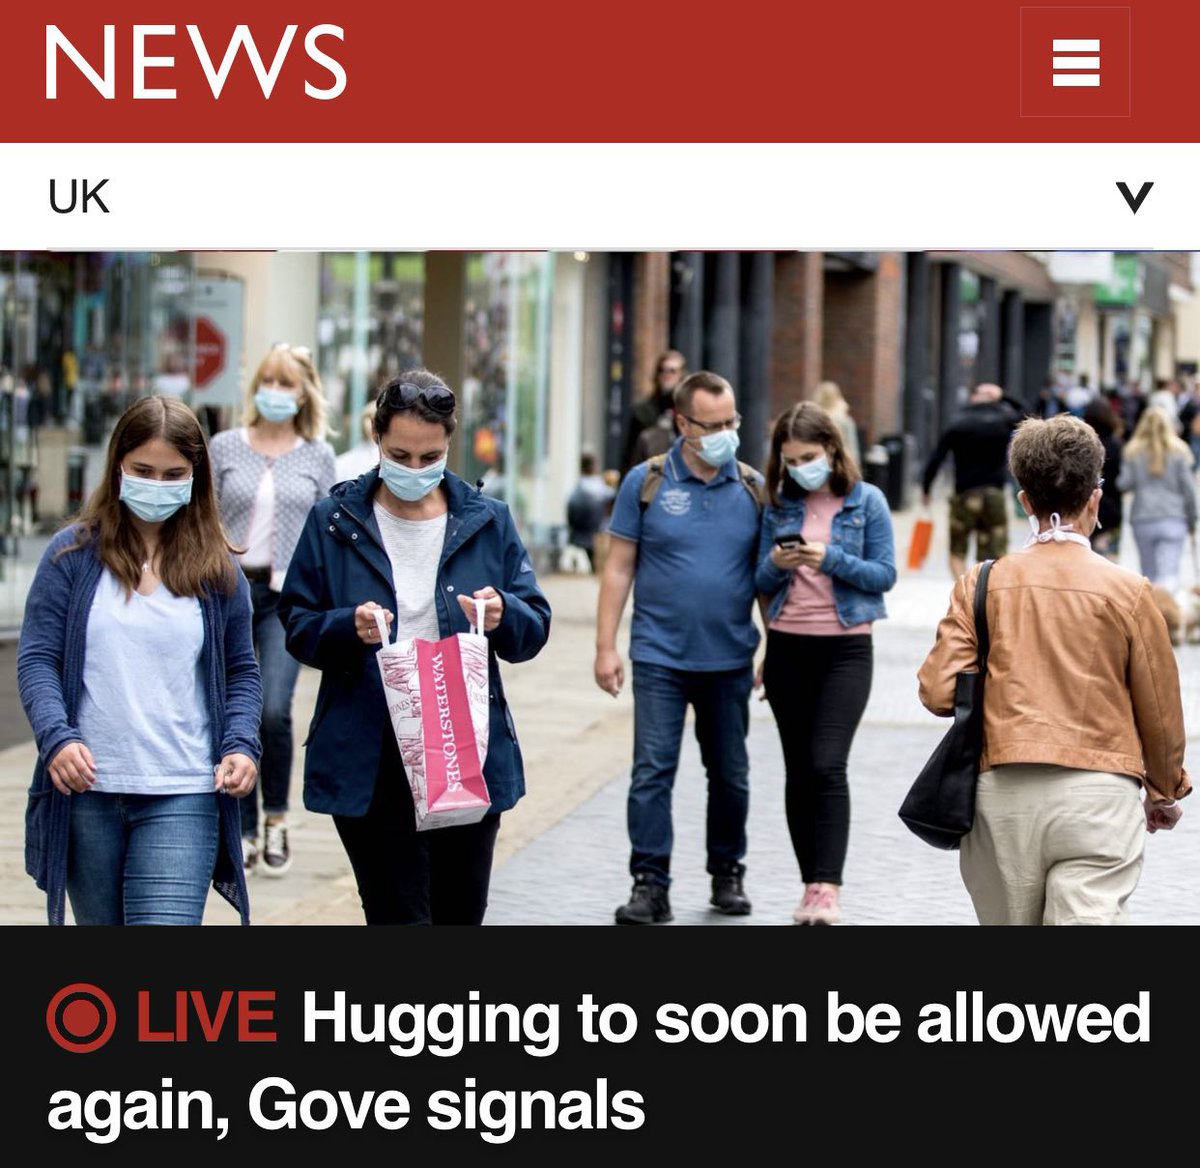 Hugging was never *not* allowed, but the fact absolutely no one in the media checked or questioned this, & that the commentariat seems A-OK with Michael Gove instructing the public on when they can/cannot embrace other humans, is why we’re now living in twilight totalitarianism